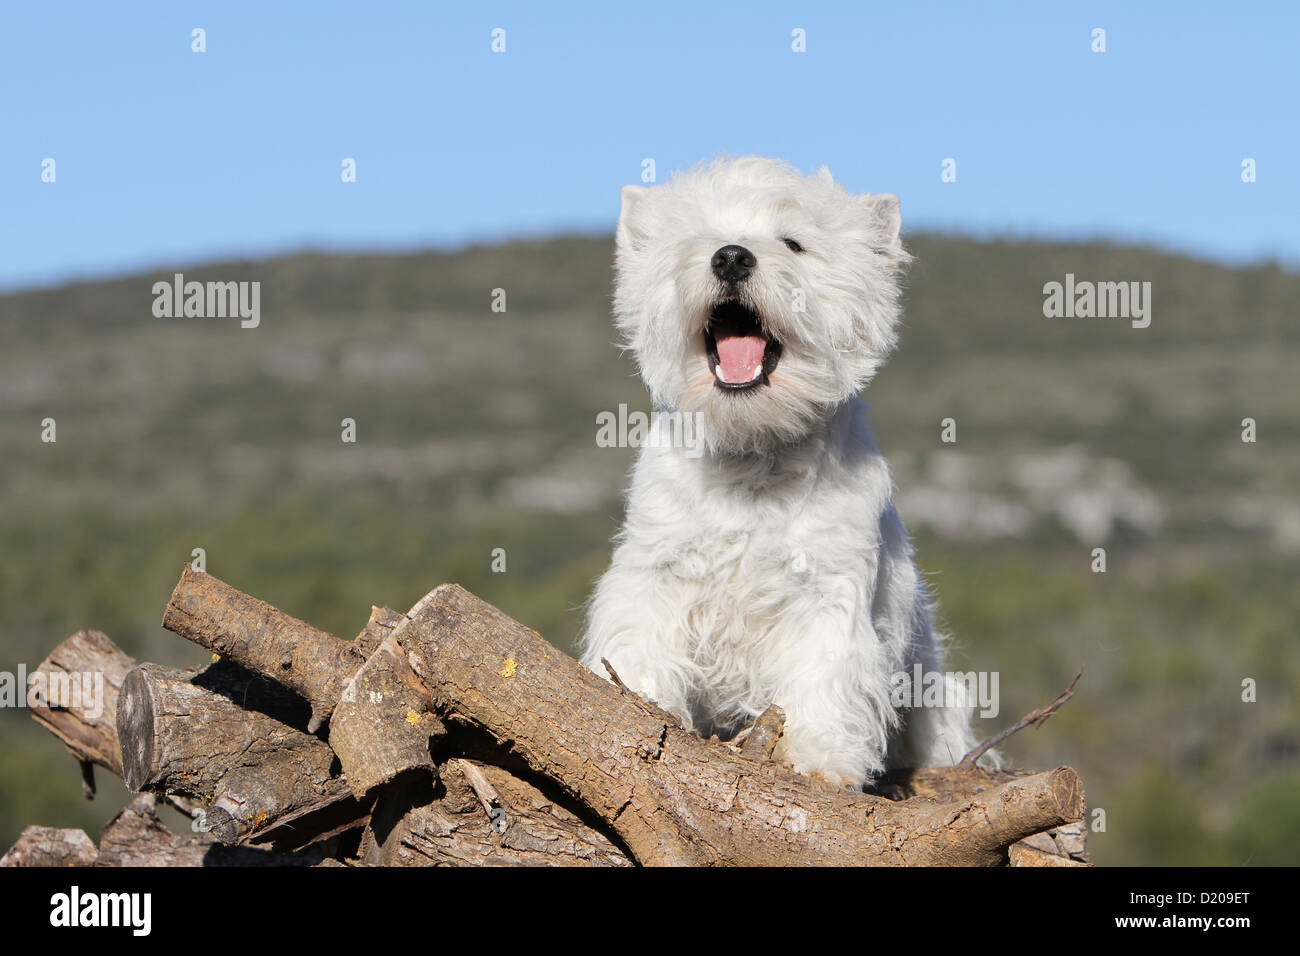 Dog West Highland White Terrier / Westie adult sitting on a wood Stock Photo